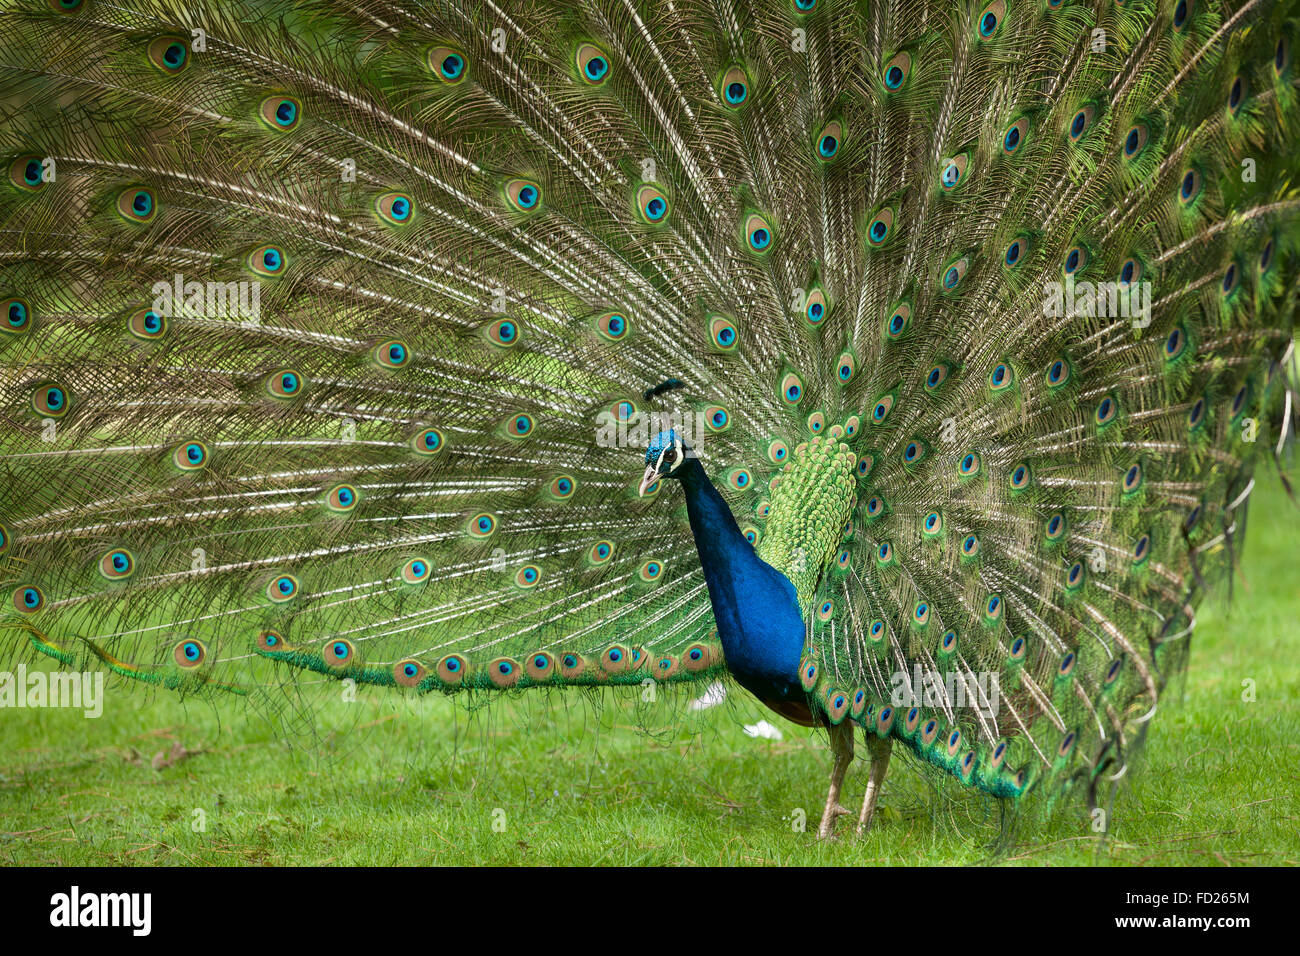 Europe, Germany, peacock, common peafowl (lat. Pavo cristatus) displaying tail, at the Forstbotanischer Garten, an arboretum and Stock Photo